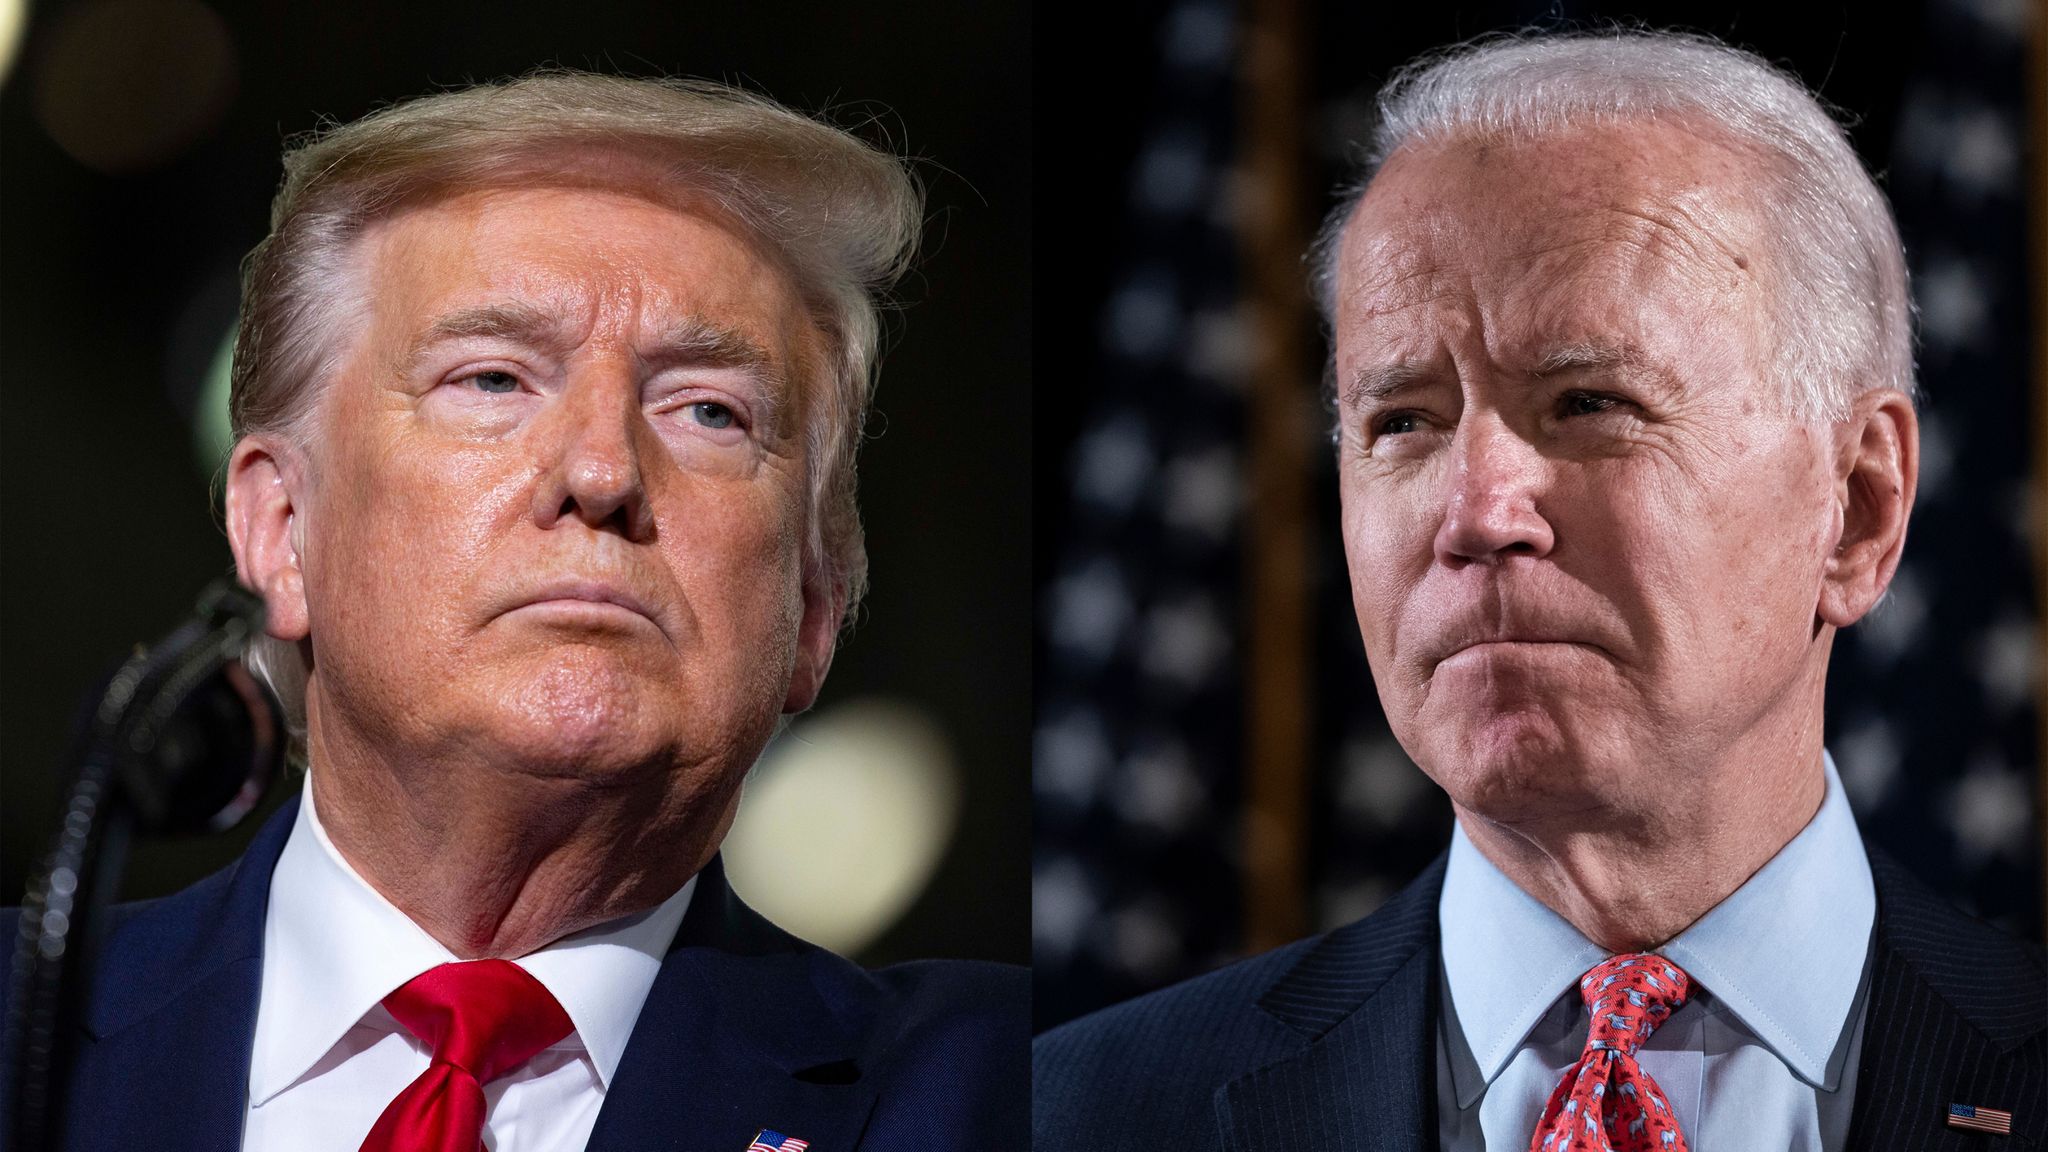 Trump or Biden? Regardless of who Wins the Rest of us Will Lose